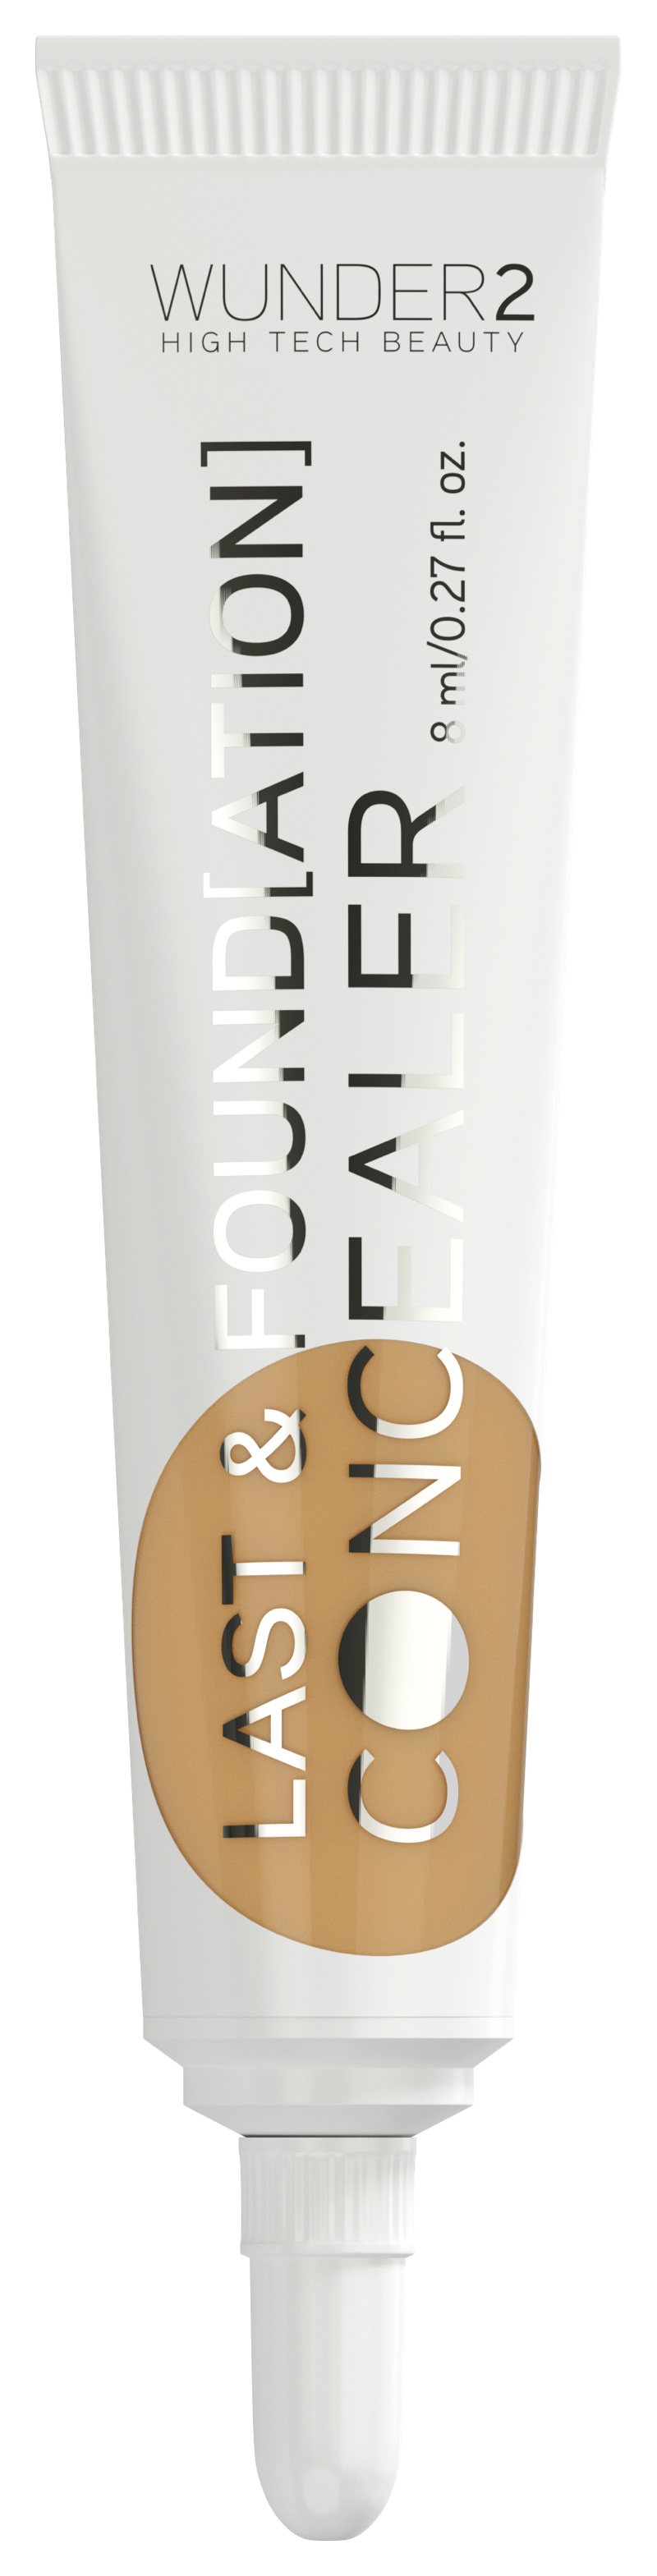 Wunder2 Cosmetics unveils new oil-free concealer